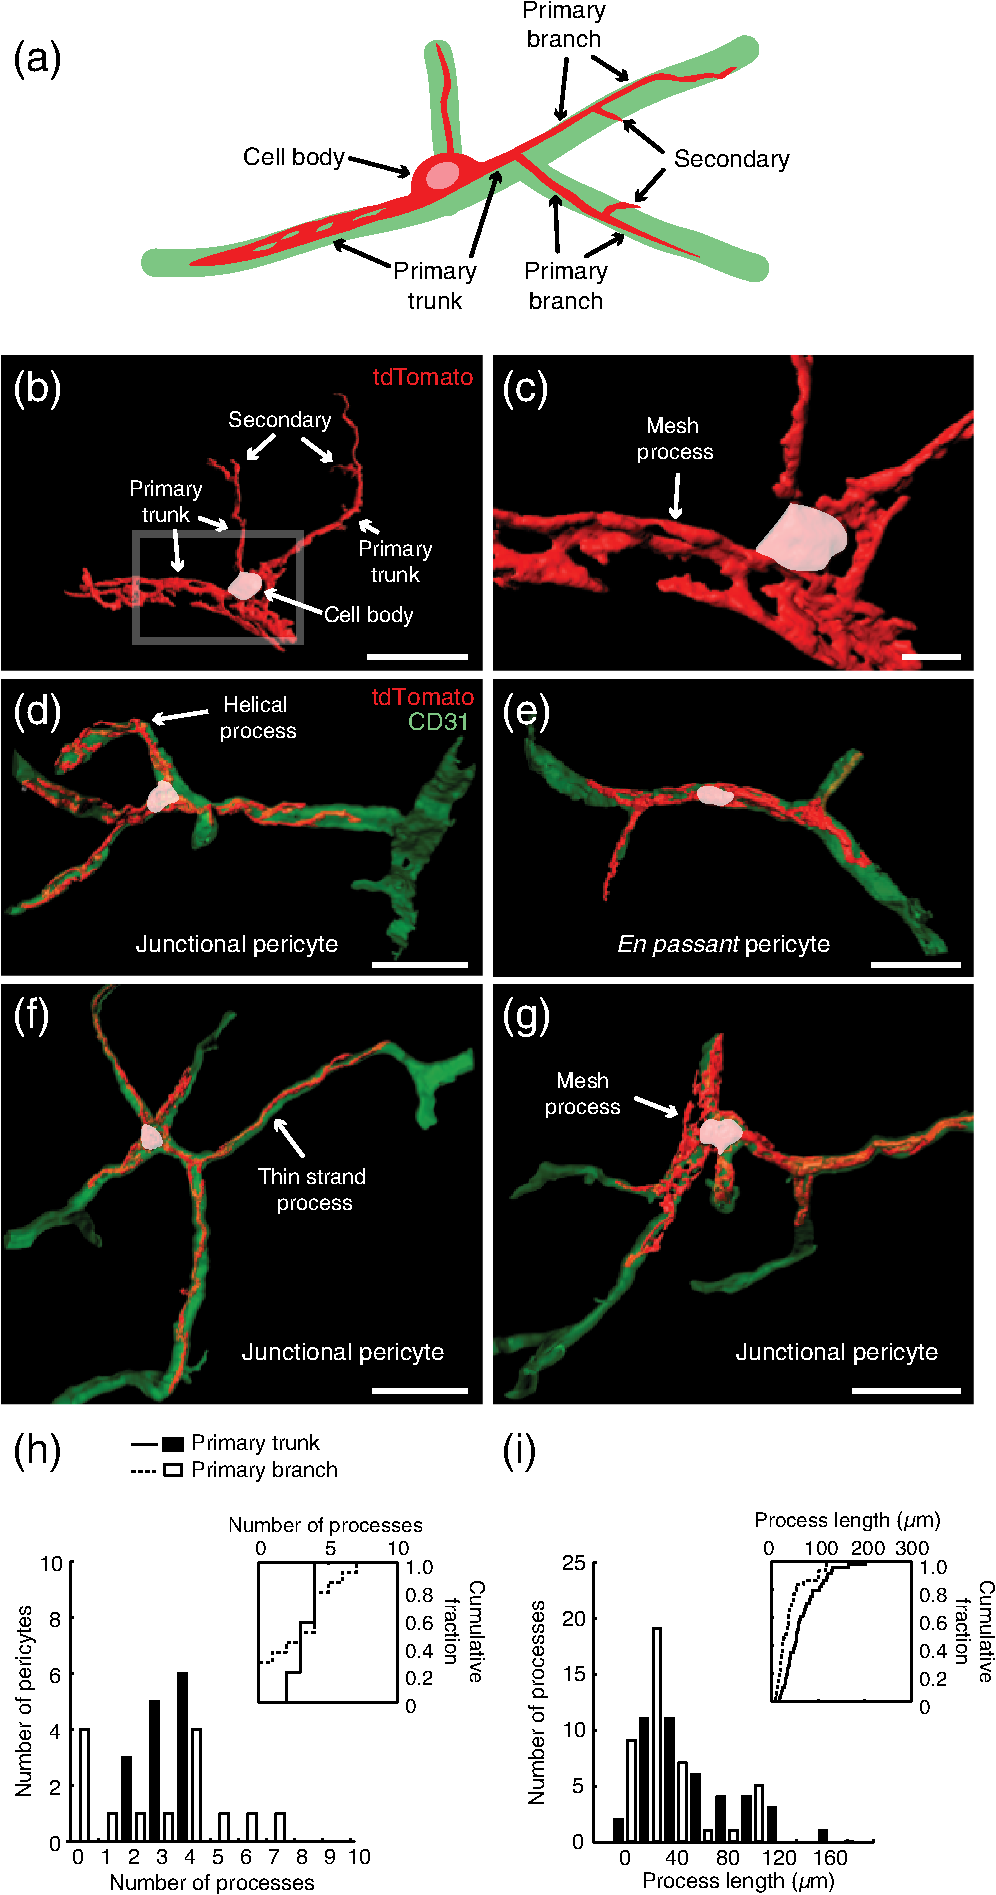 Pericyte Structure And Distribution In The Cerebral Cortex Revealed By High Resolution Imaging Of Transgenic Mice